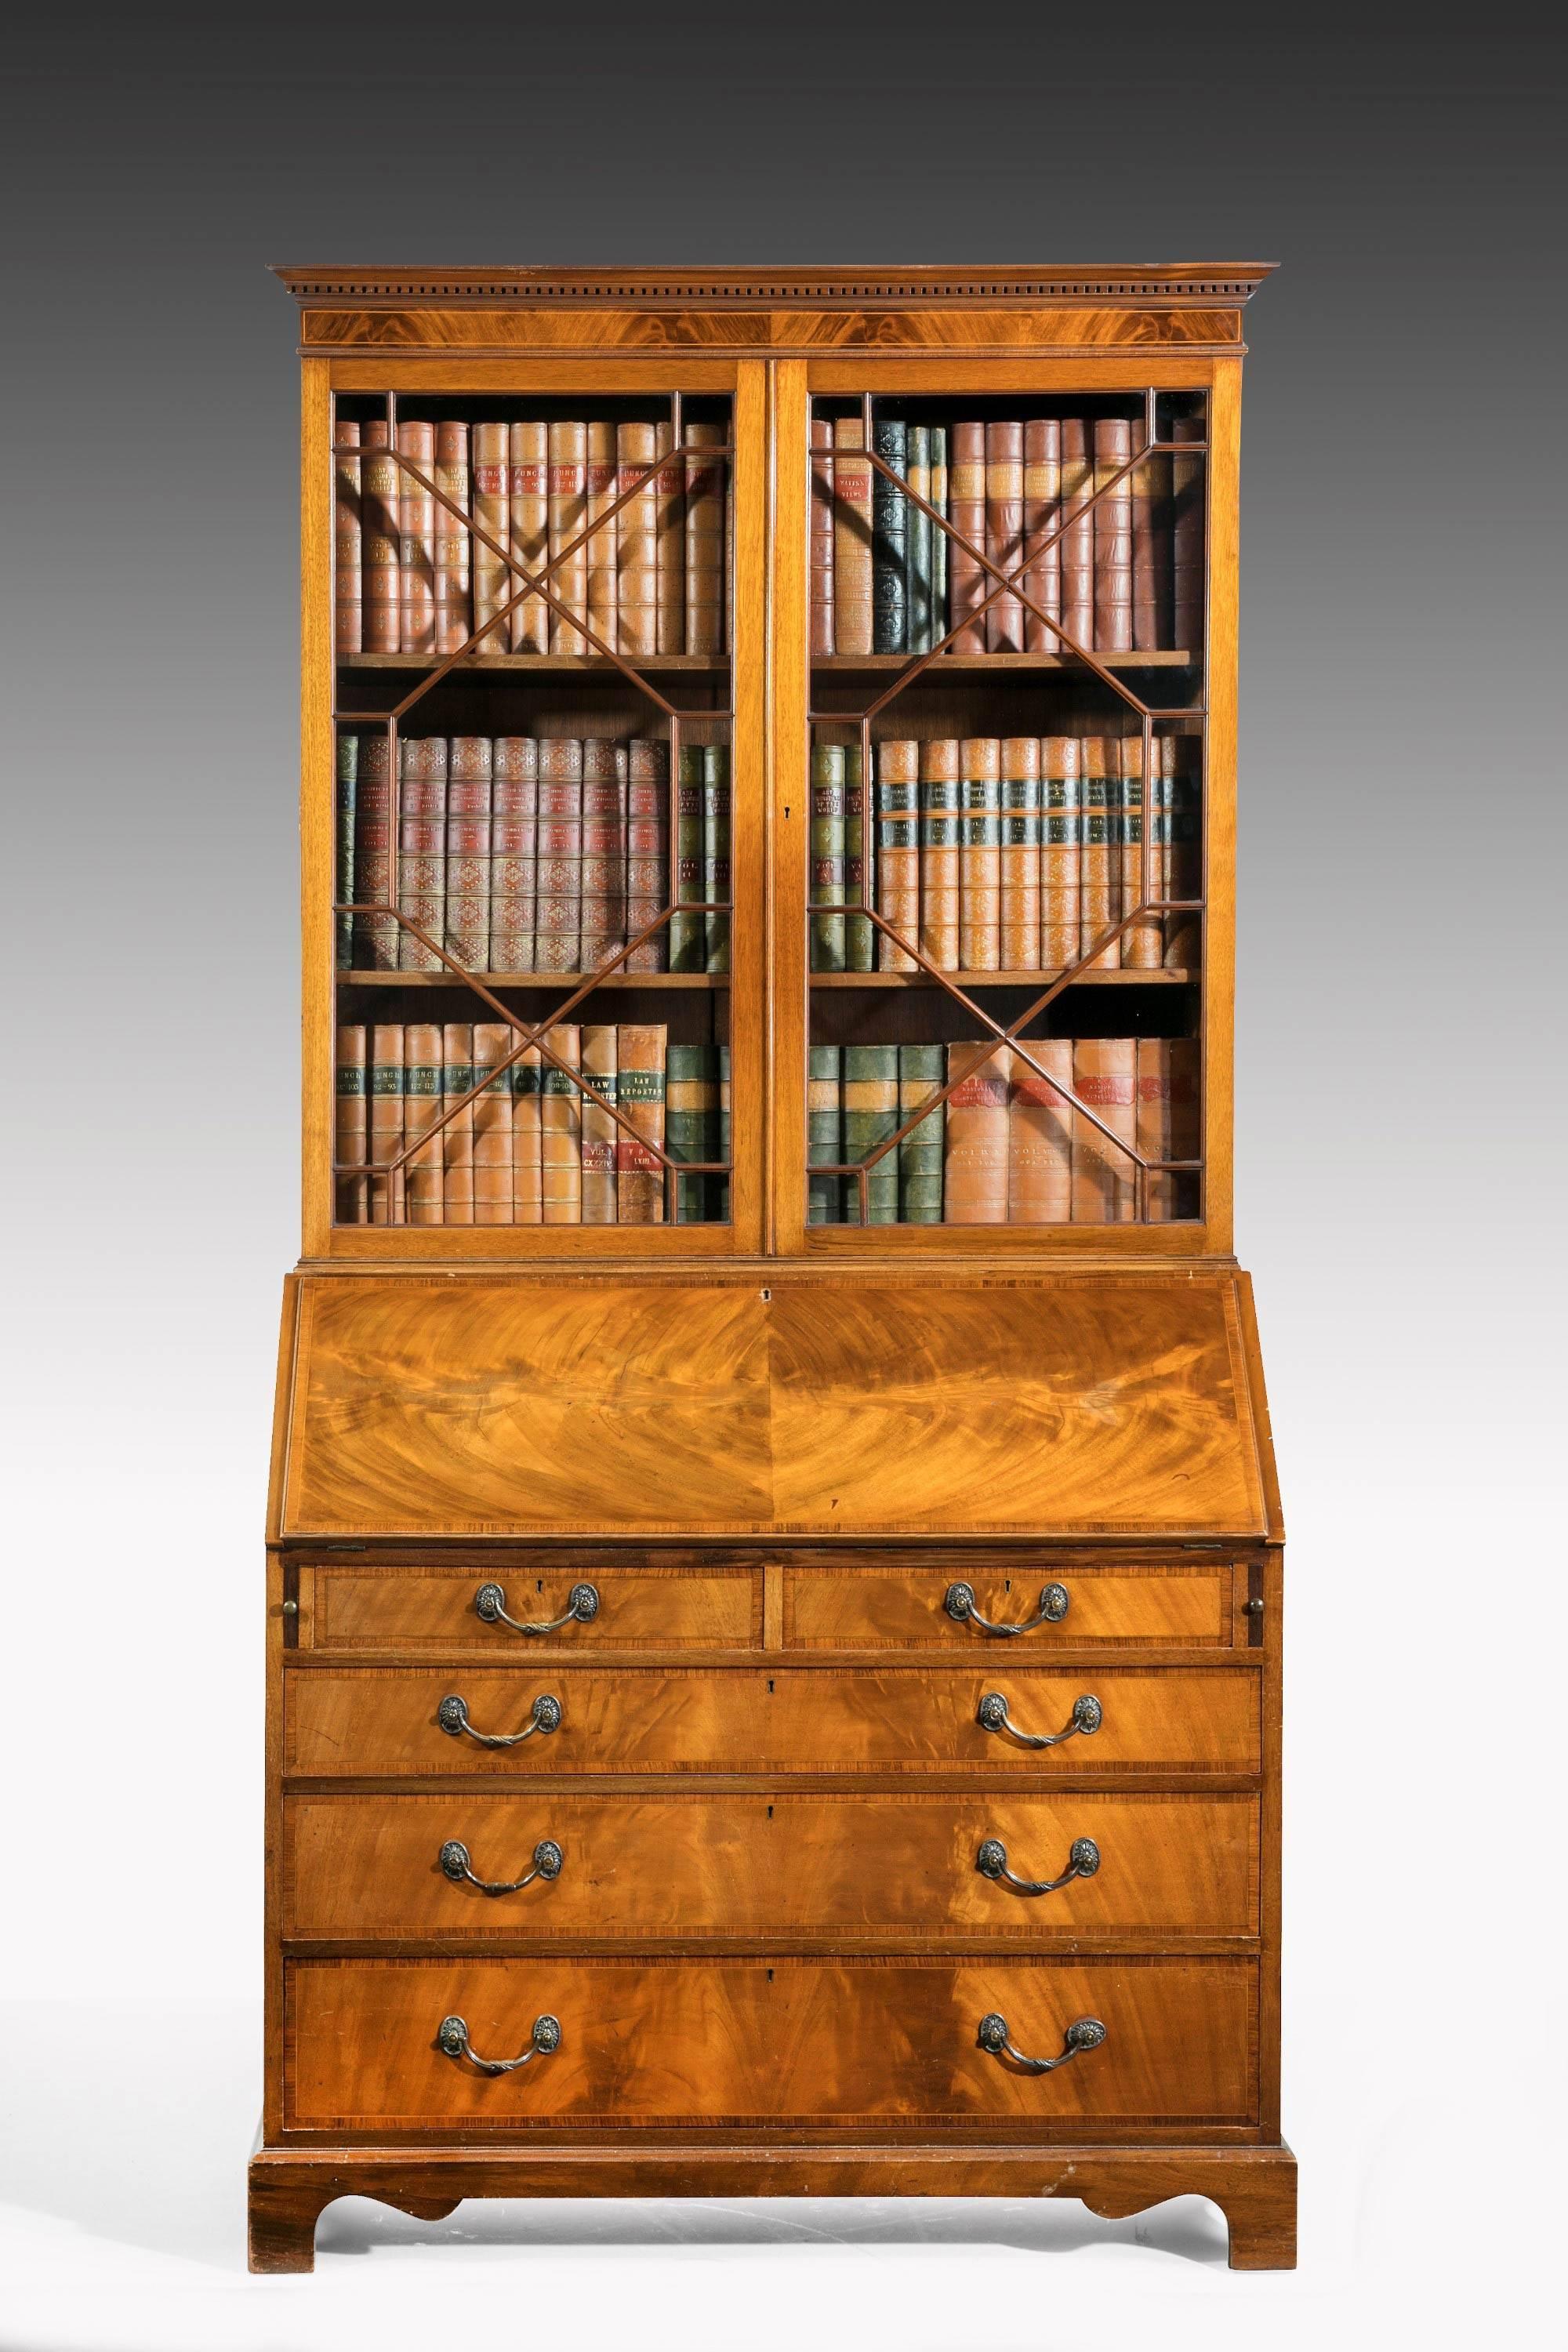 Great Britain (UK) George III Period Mahogany Bureau Bookcase with Finely Matched Timbers